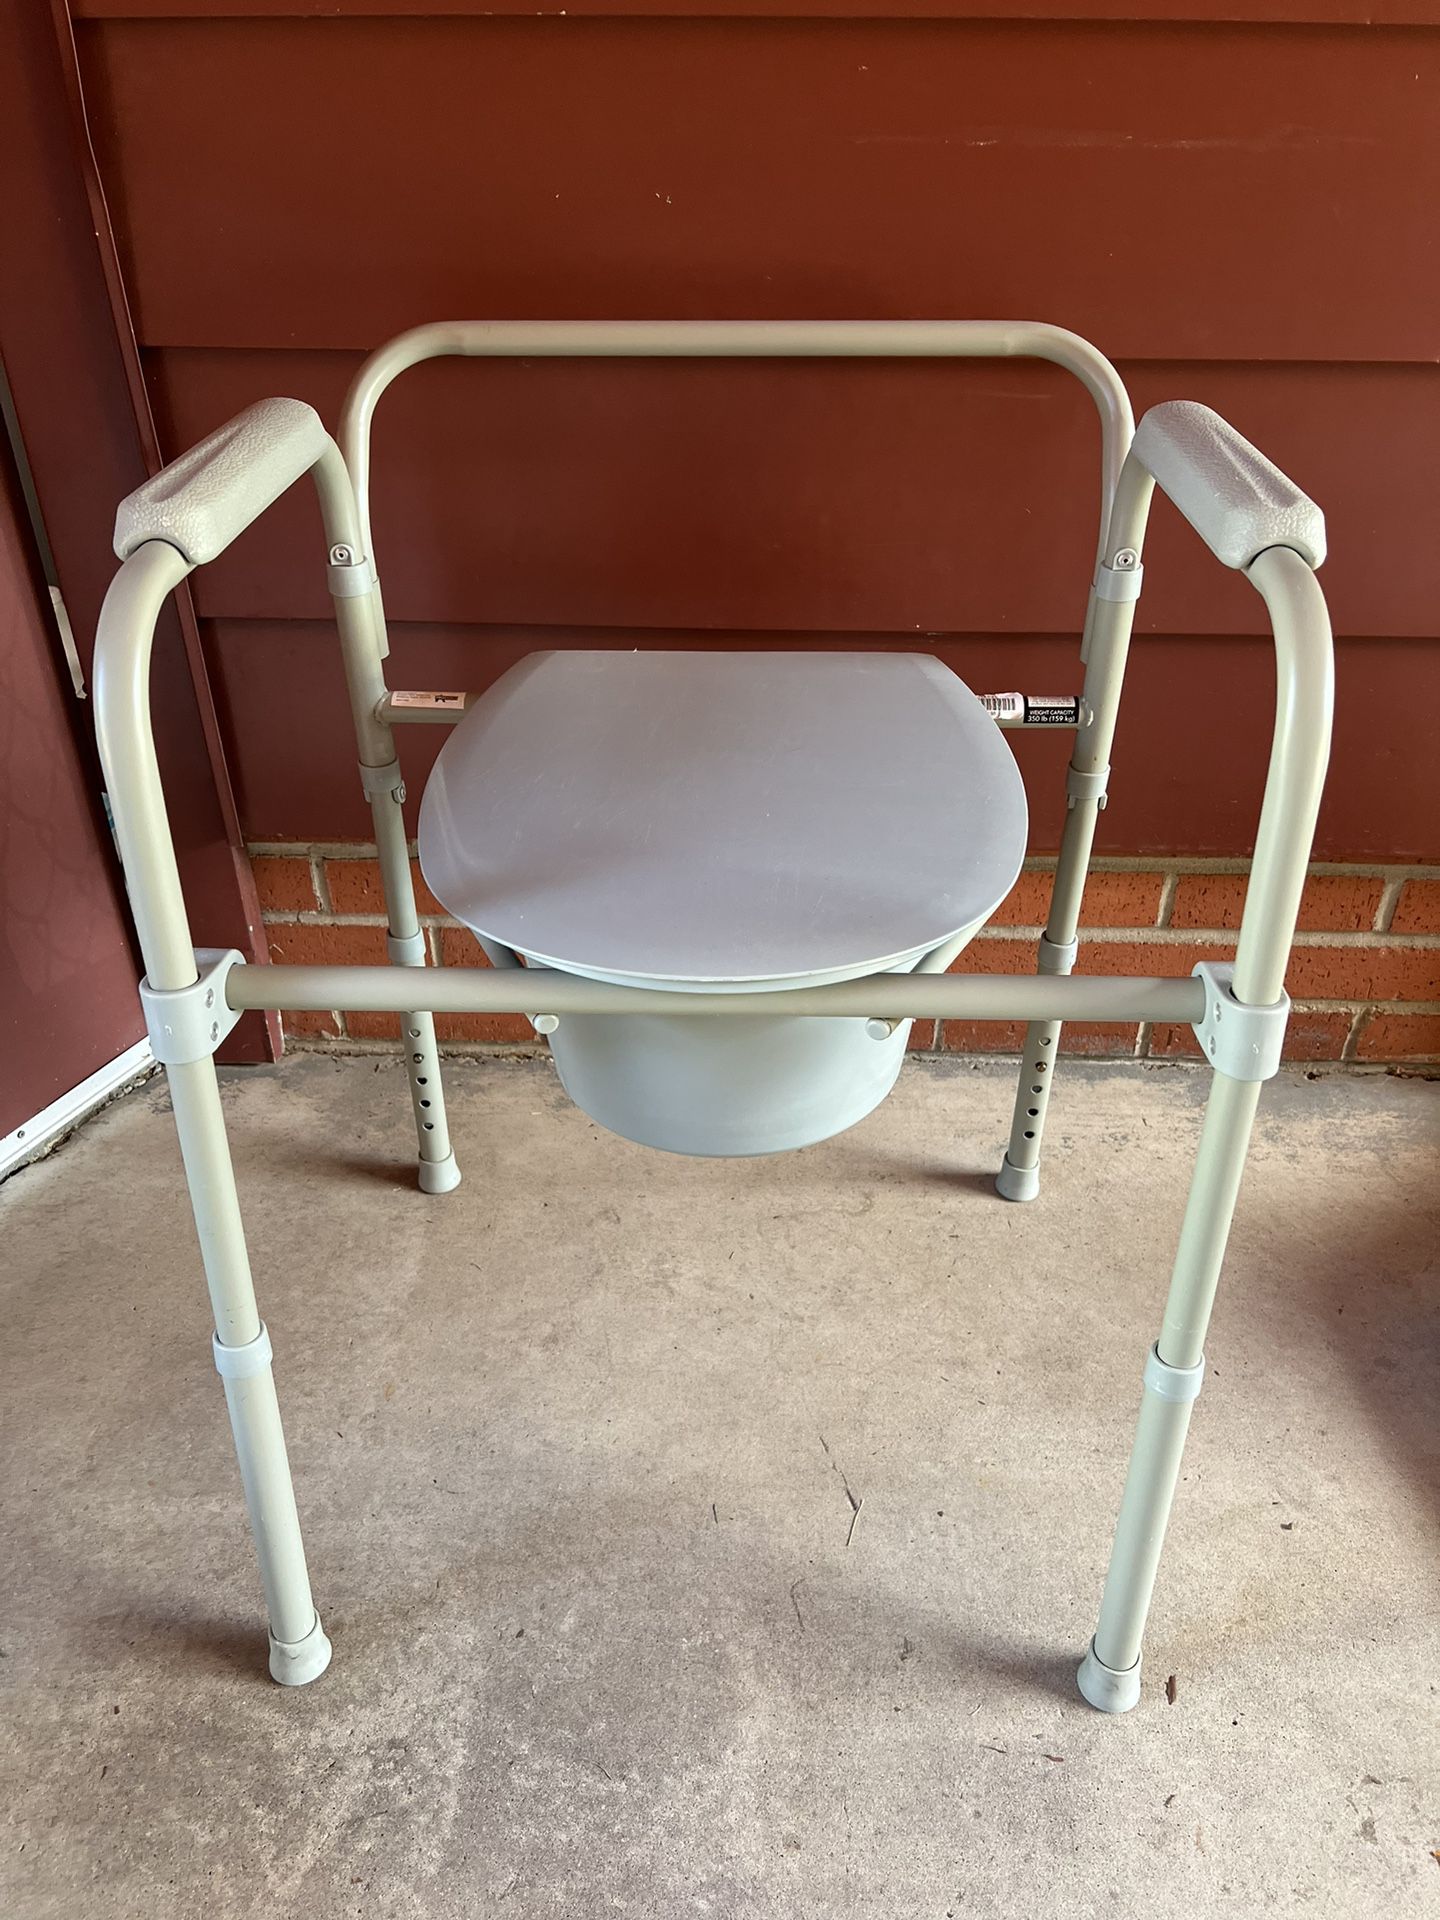 Bedside Potty Chair